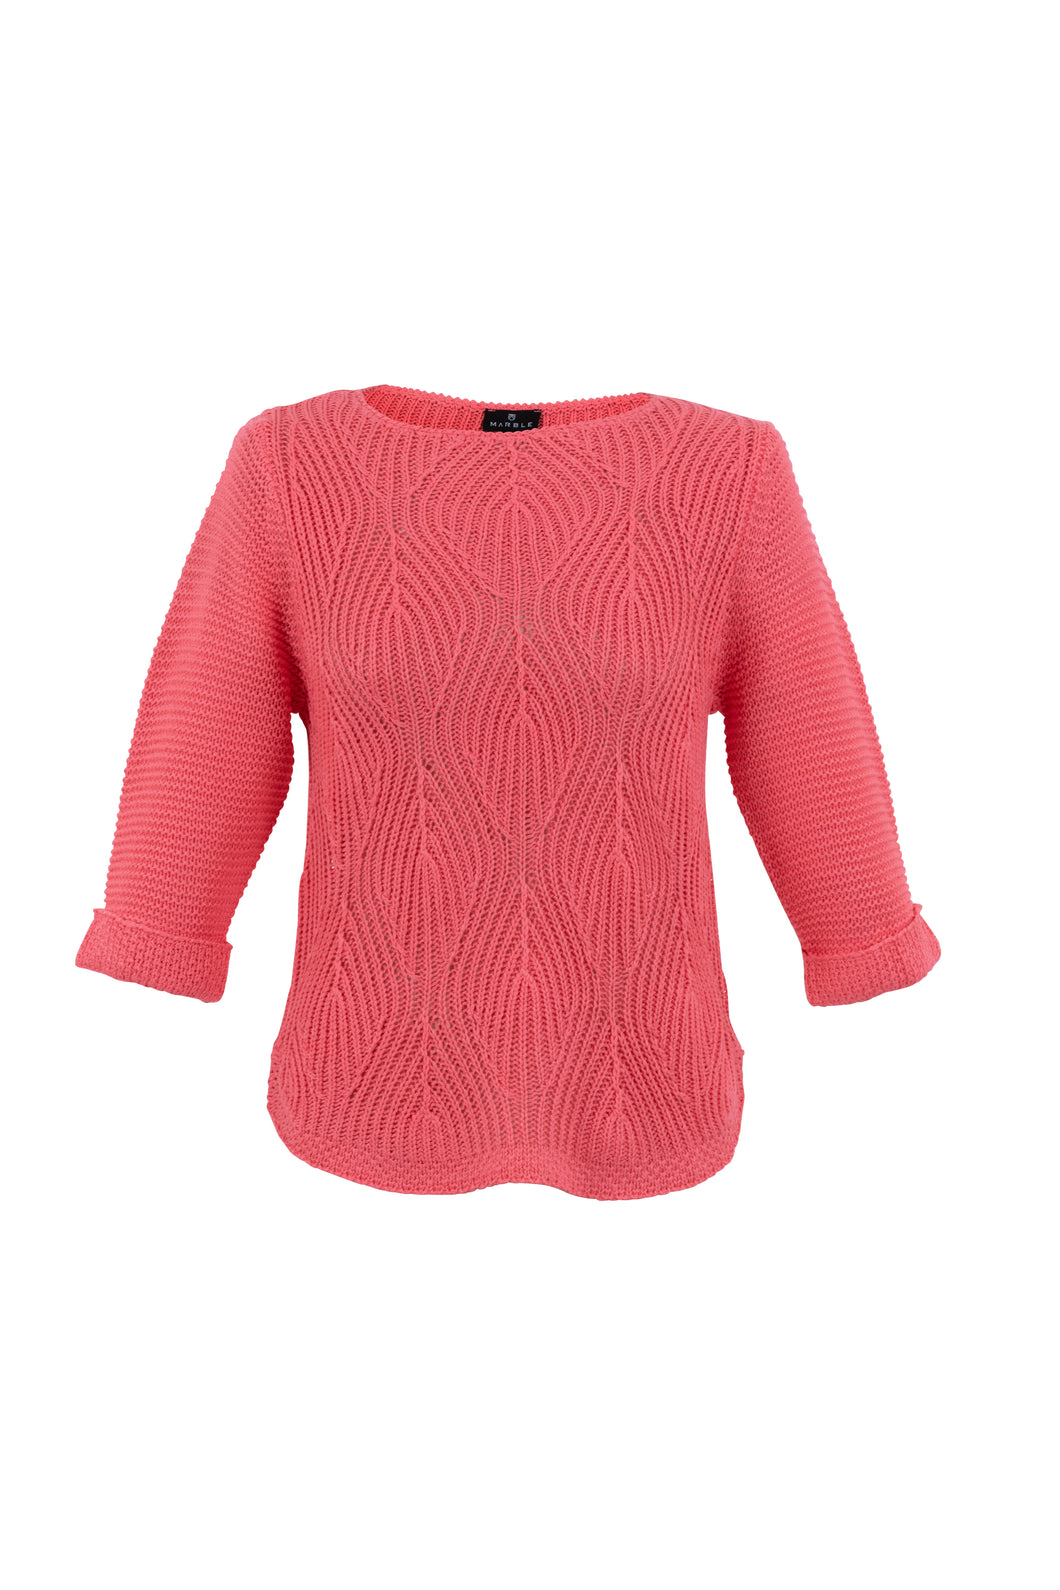 Marble Round Neck Loose Knit Cuffed Elbow Sleeve Sweater in Watermelon or White